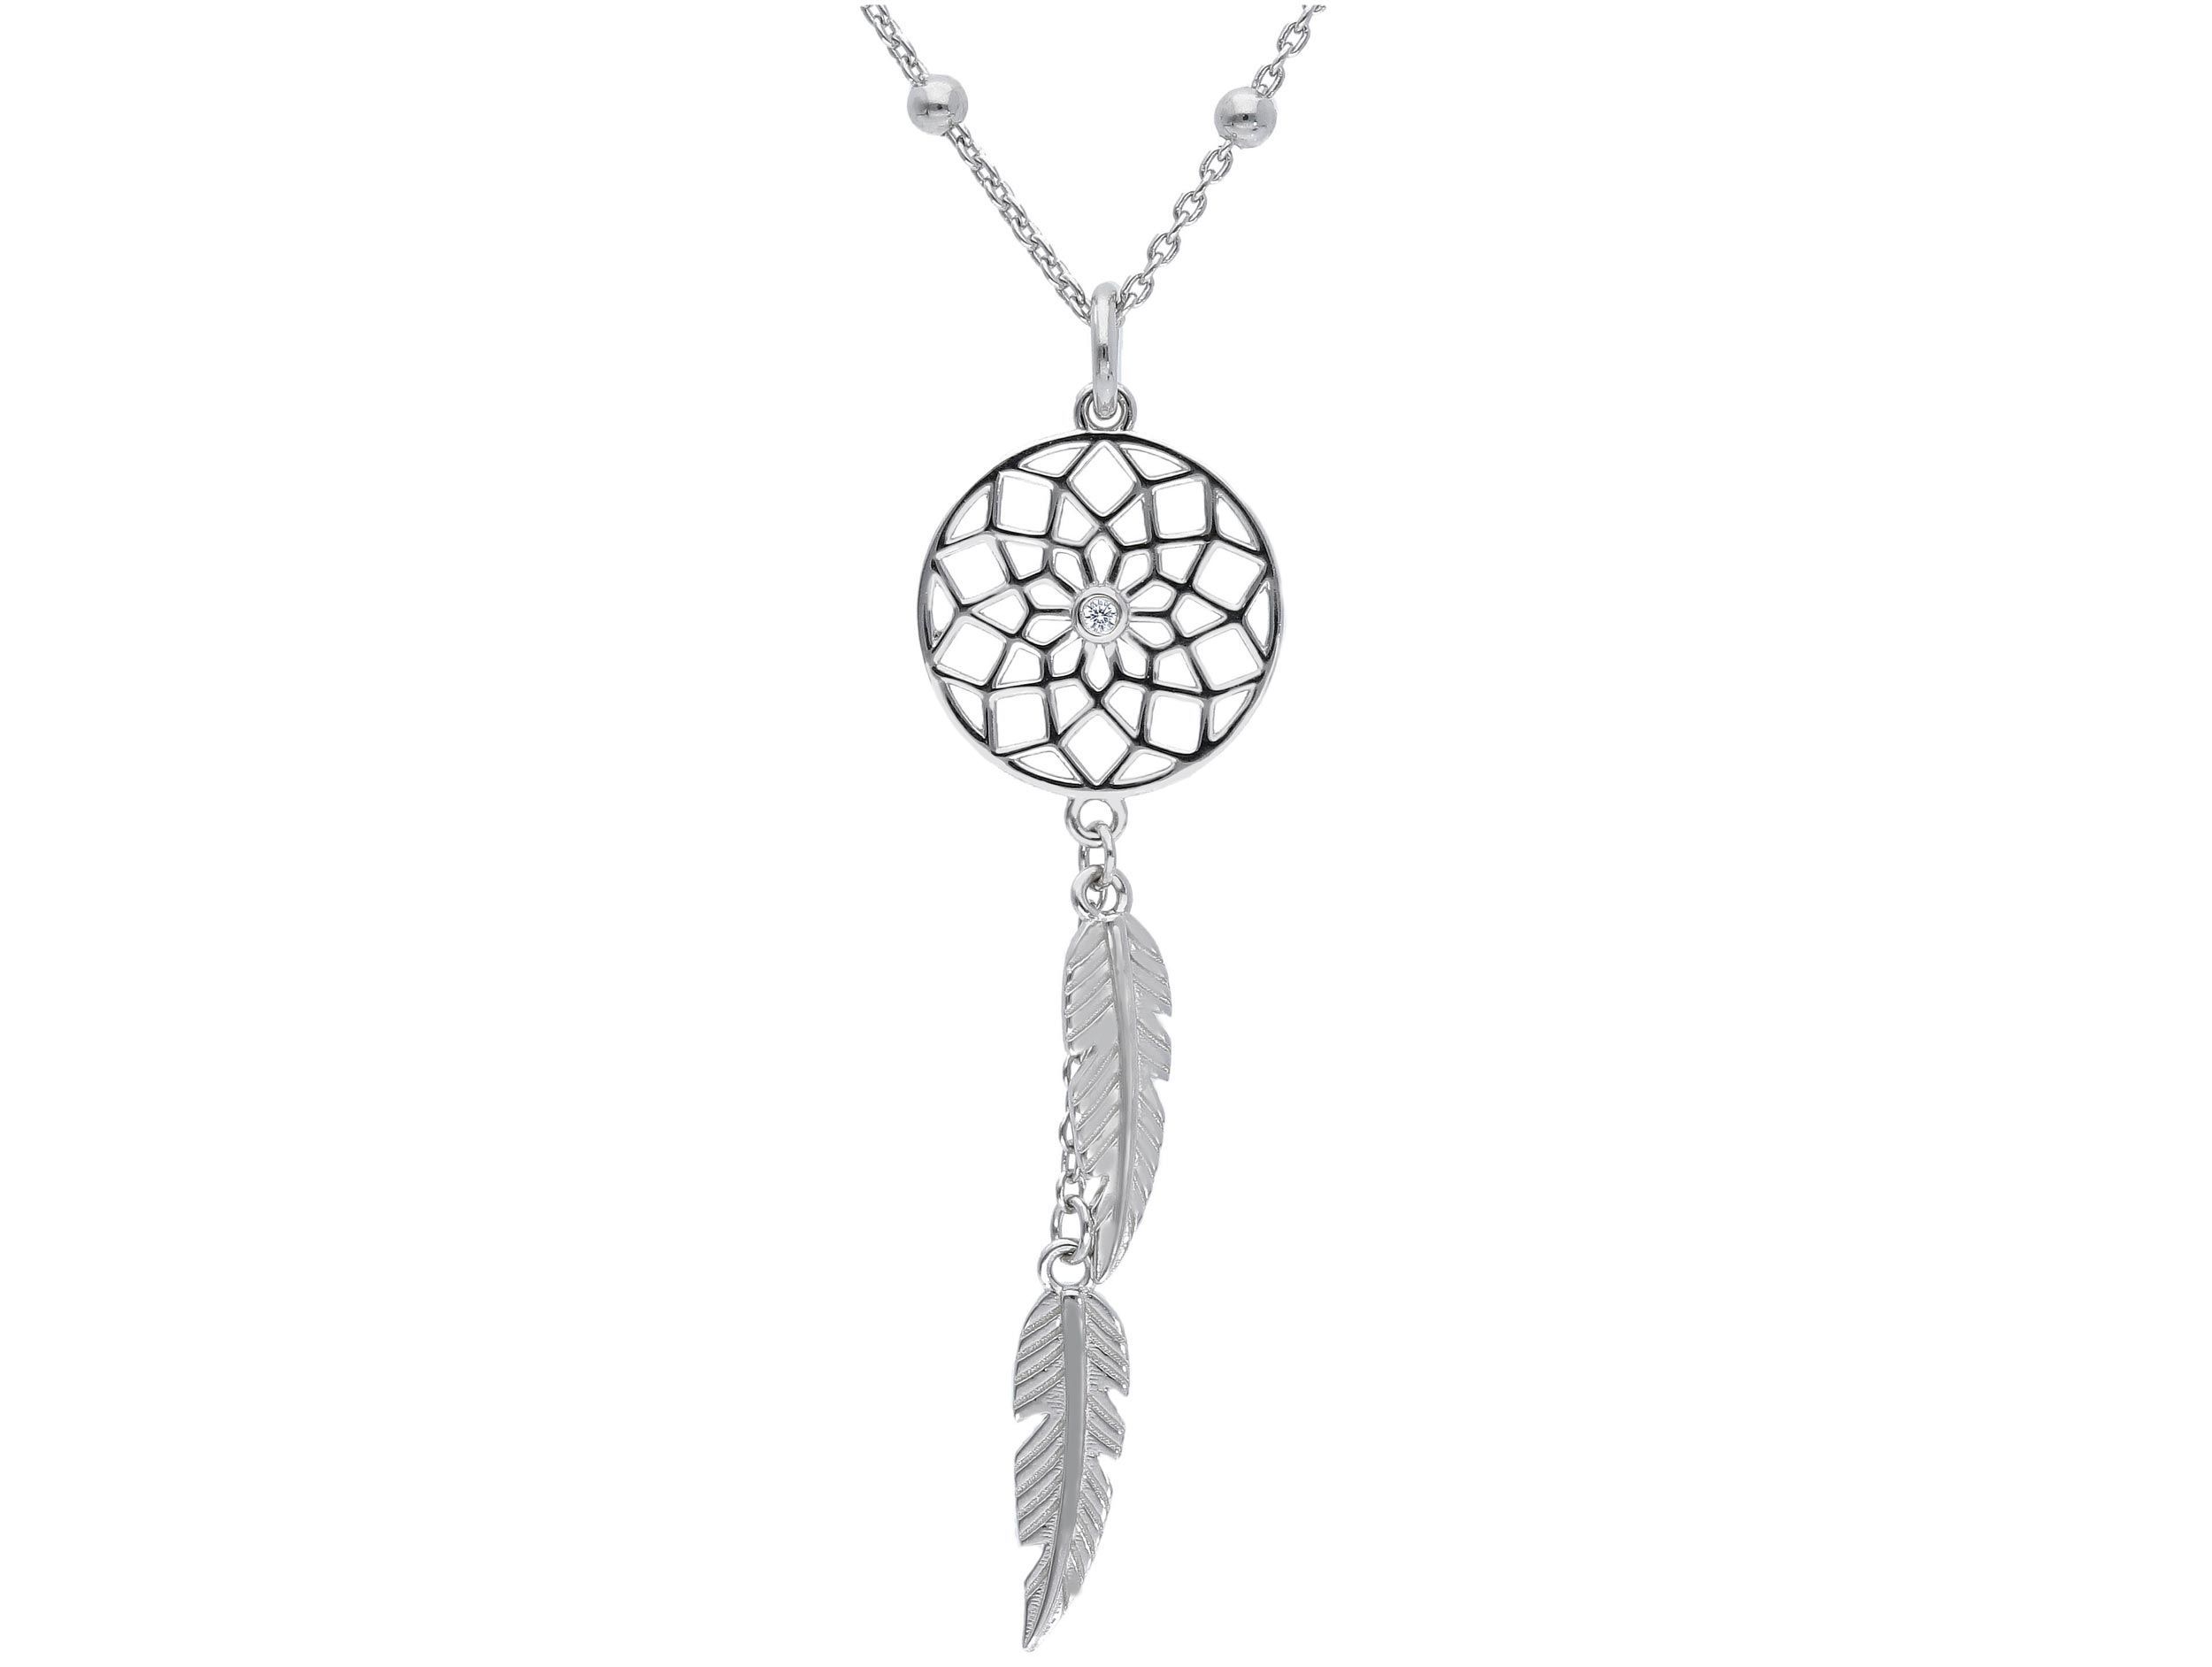   Platinum plated silver 925° necklace (code S249742)